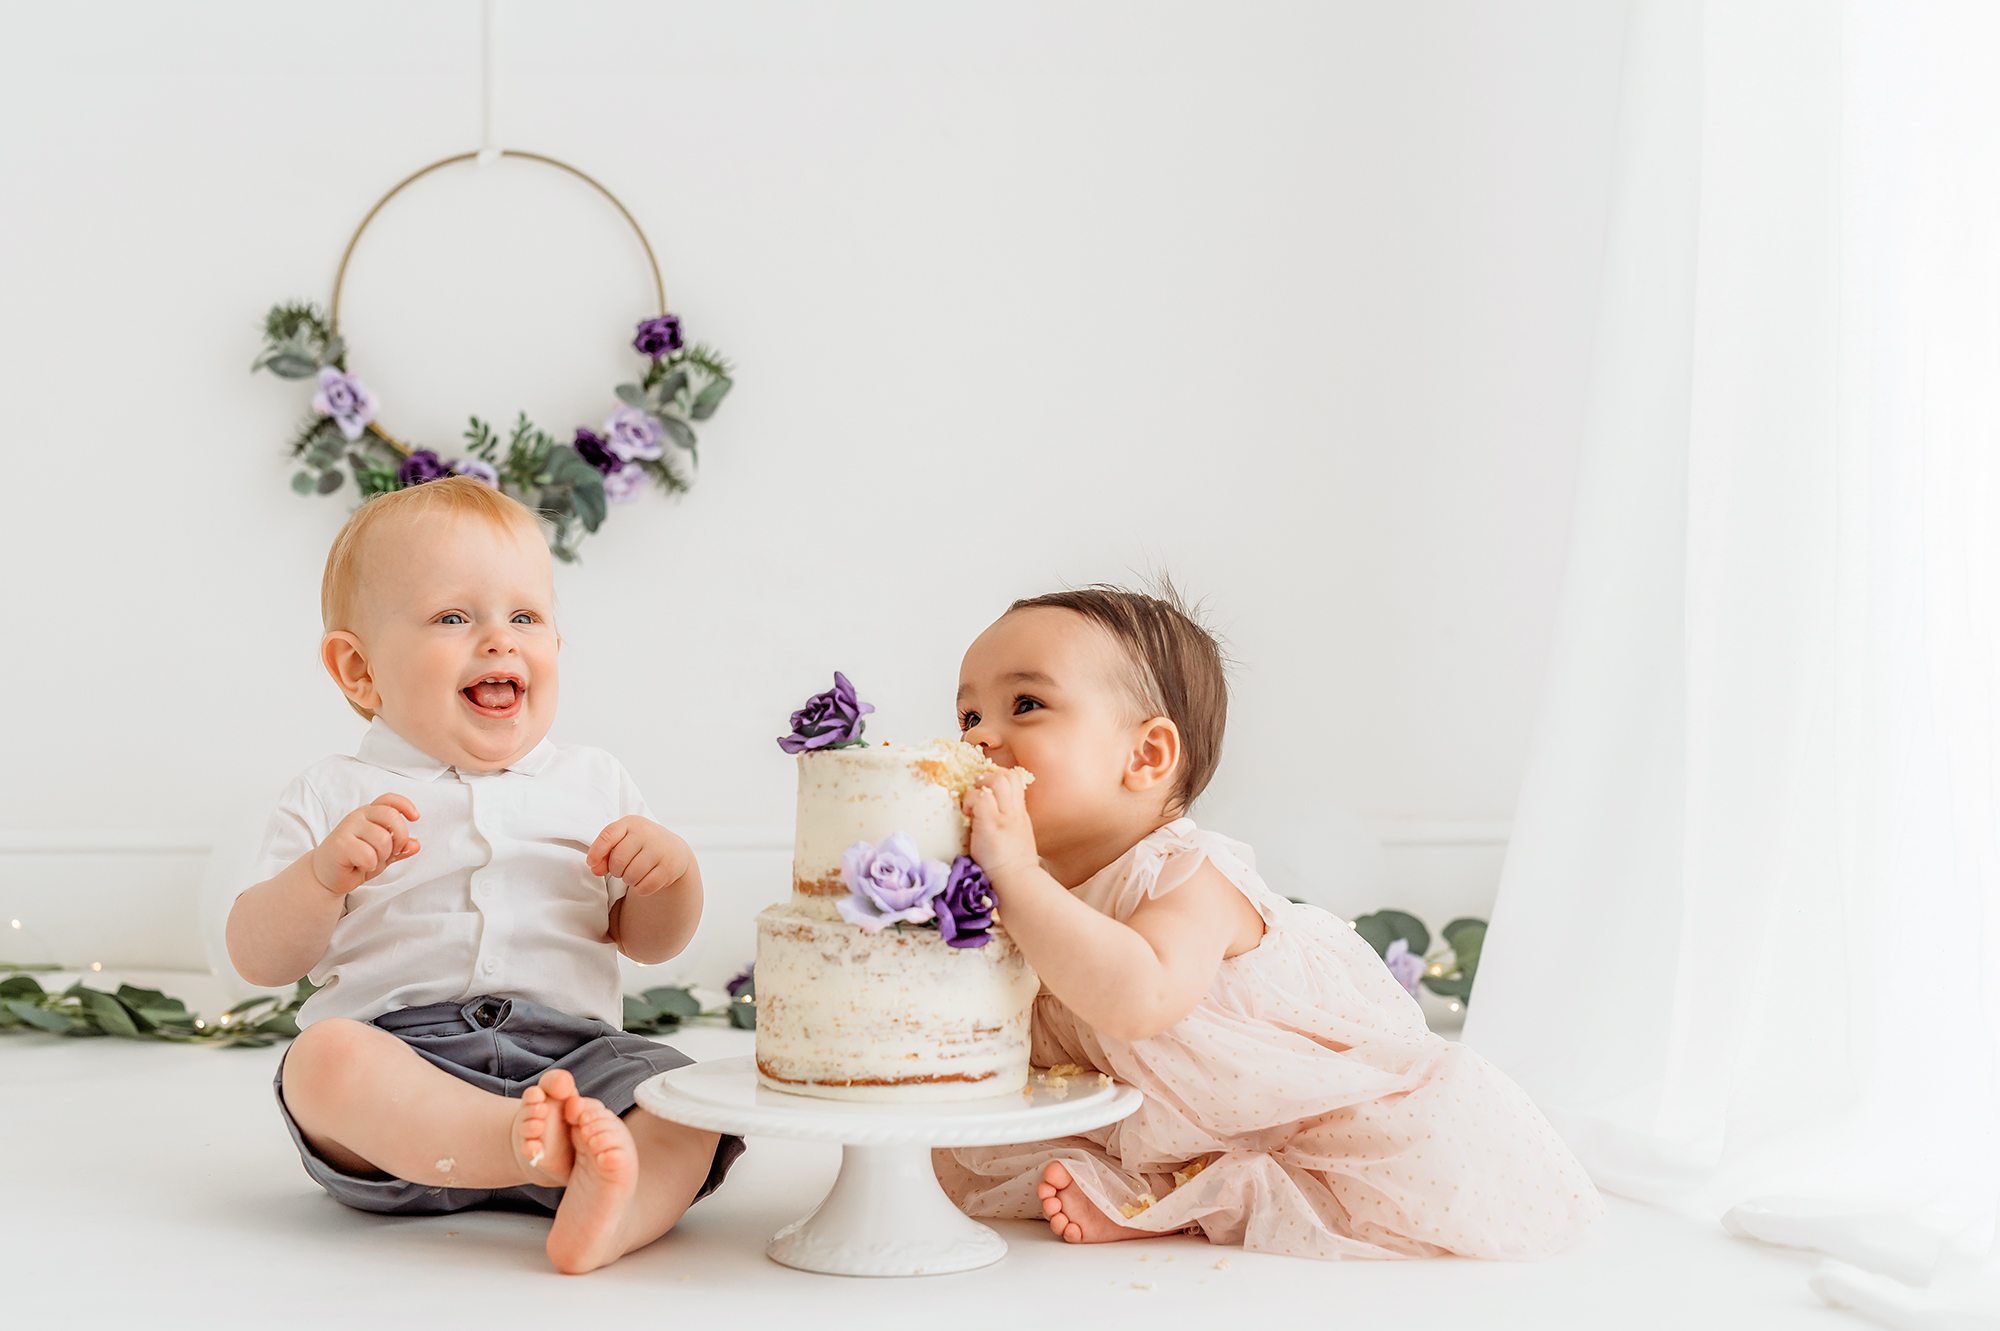 photoshoot with mamas & papas - baby diving in for cake